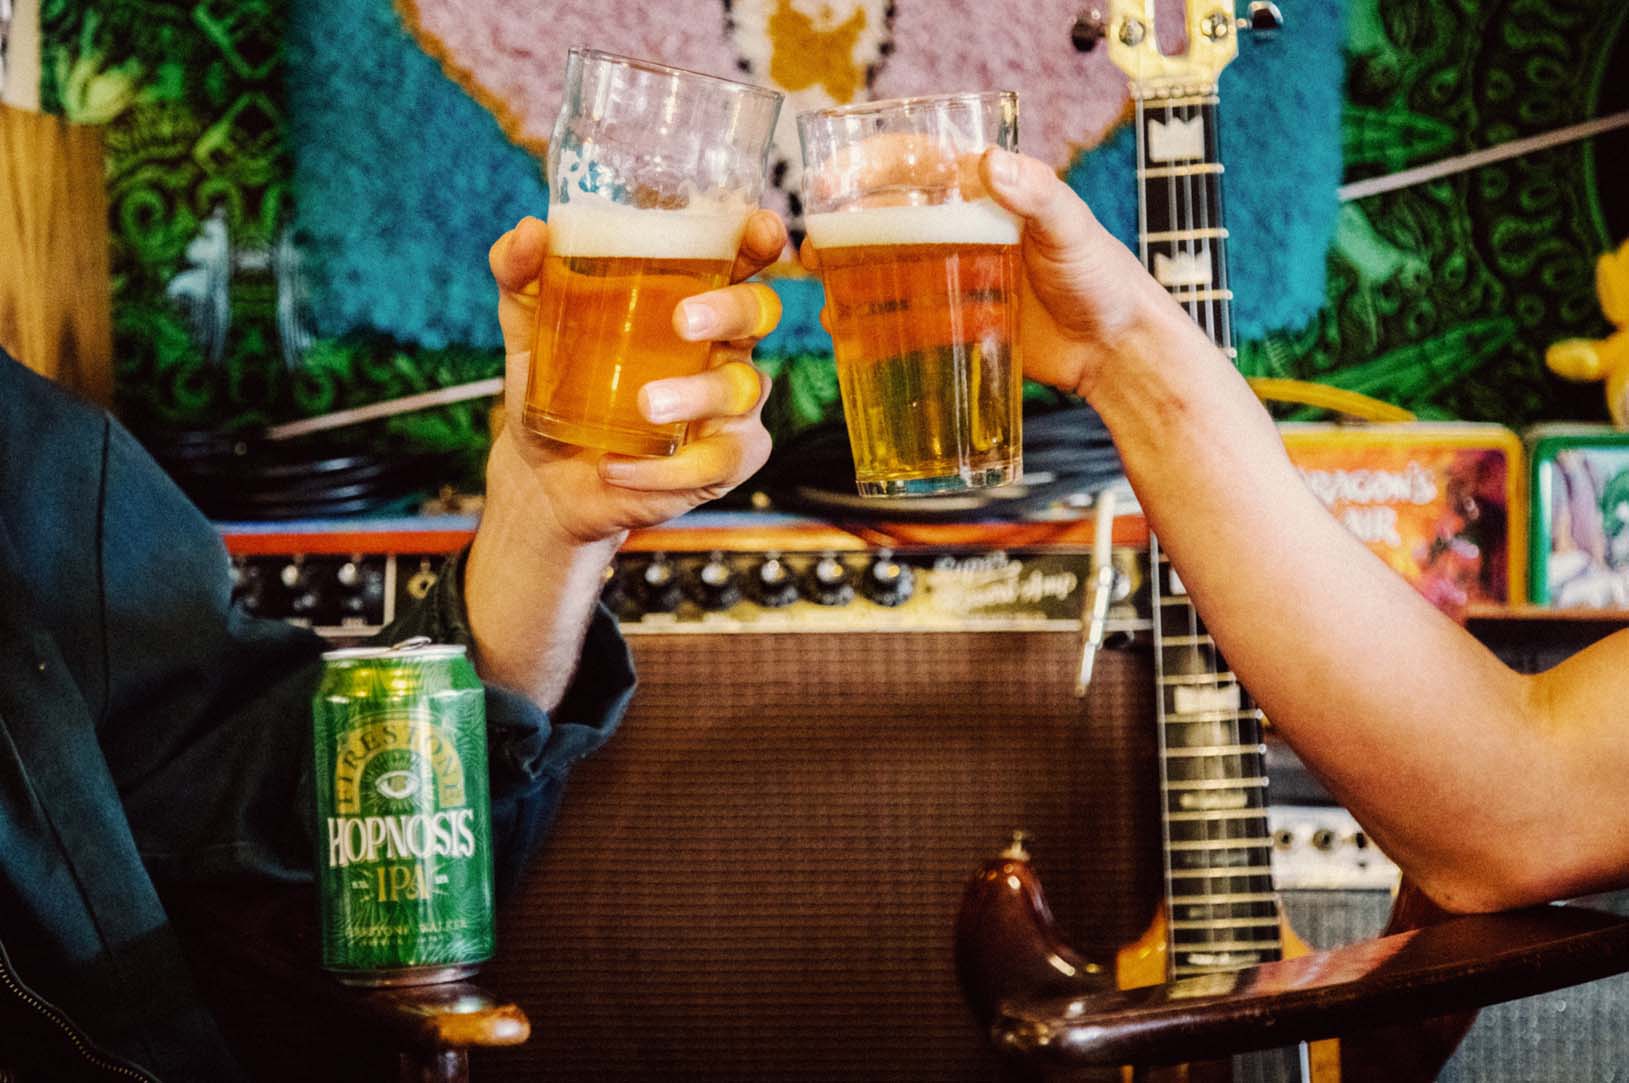 Cheers to Hopnosis IPA from Firestone Walker Brewing, the brewery's new West Coast IPA. (image courtesy of Firestone Walker Brewing)